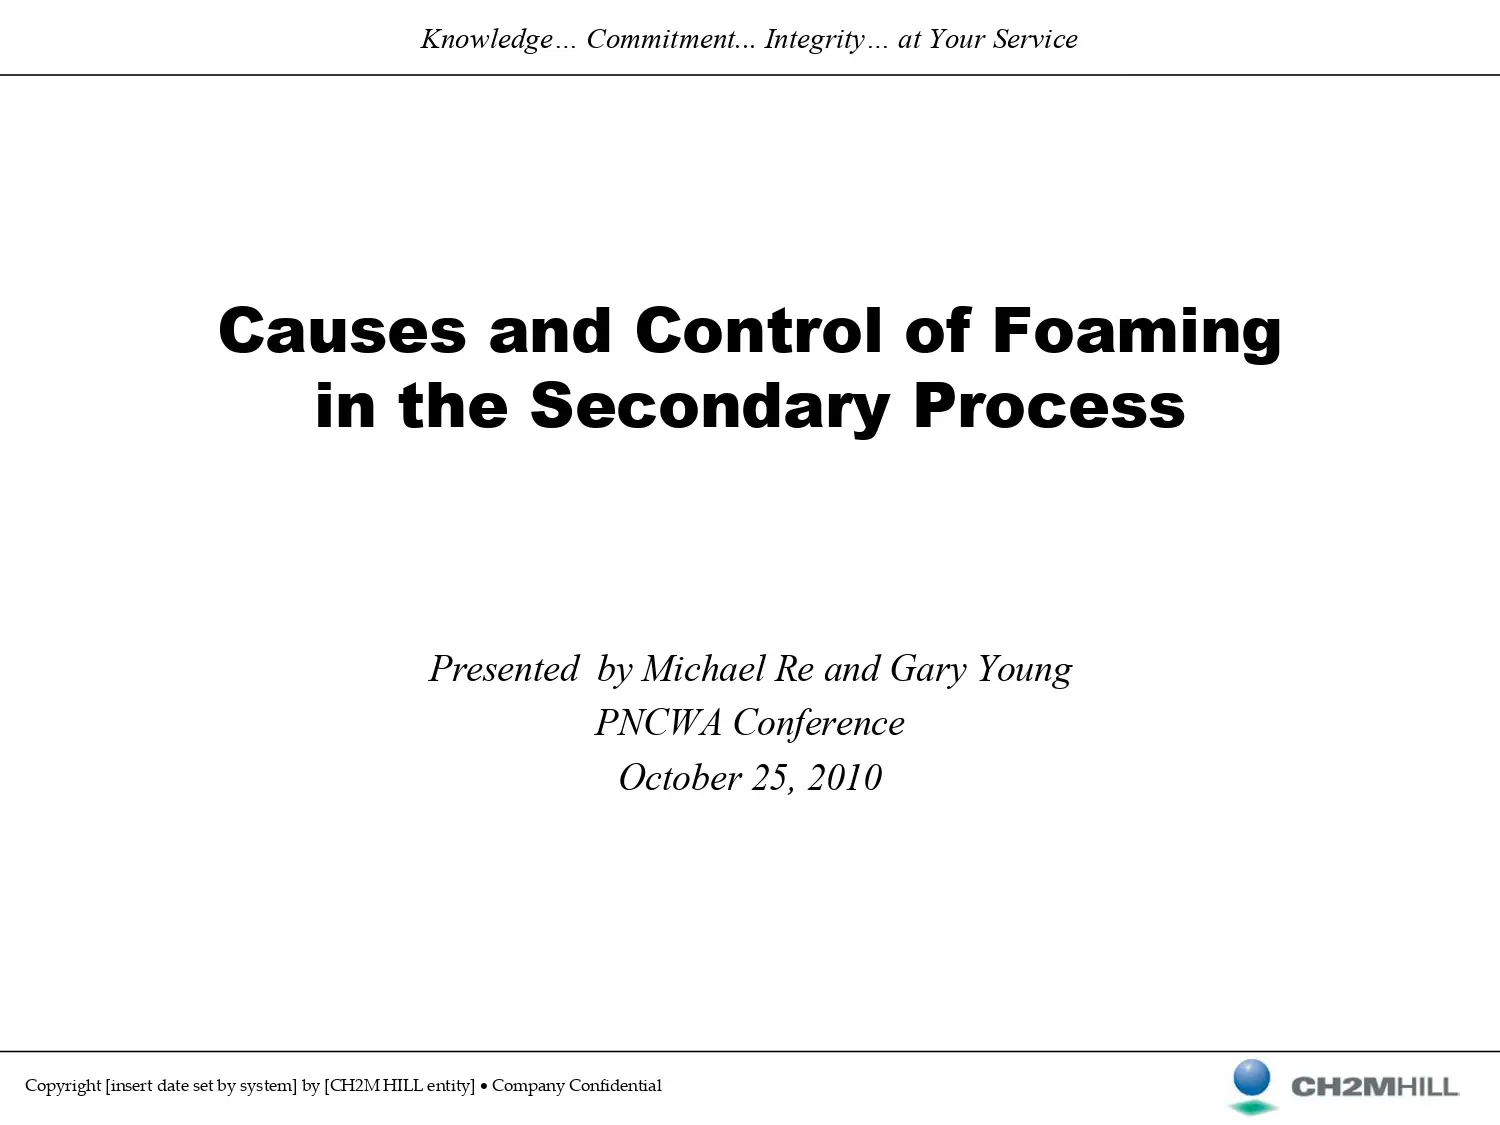 Causes and Control of Foaming in the Secondary Process